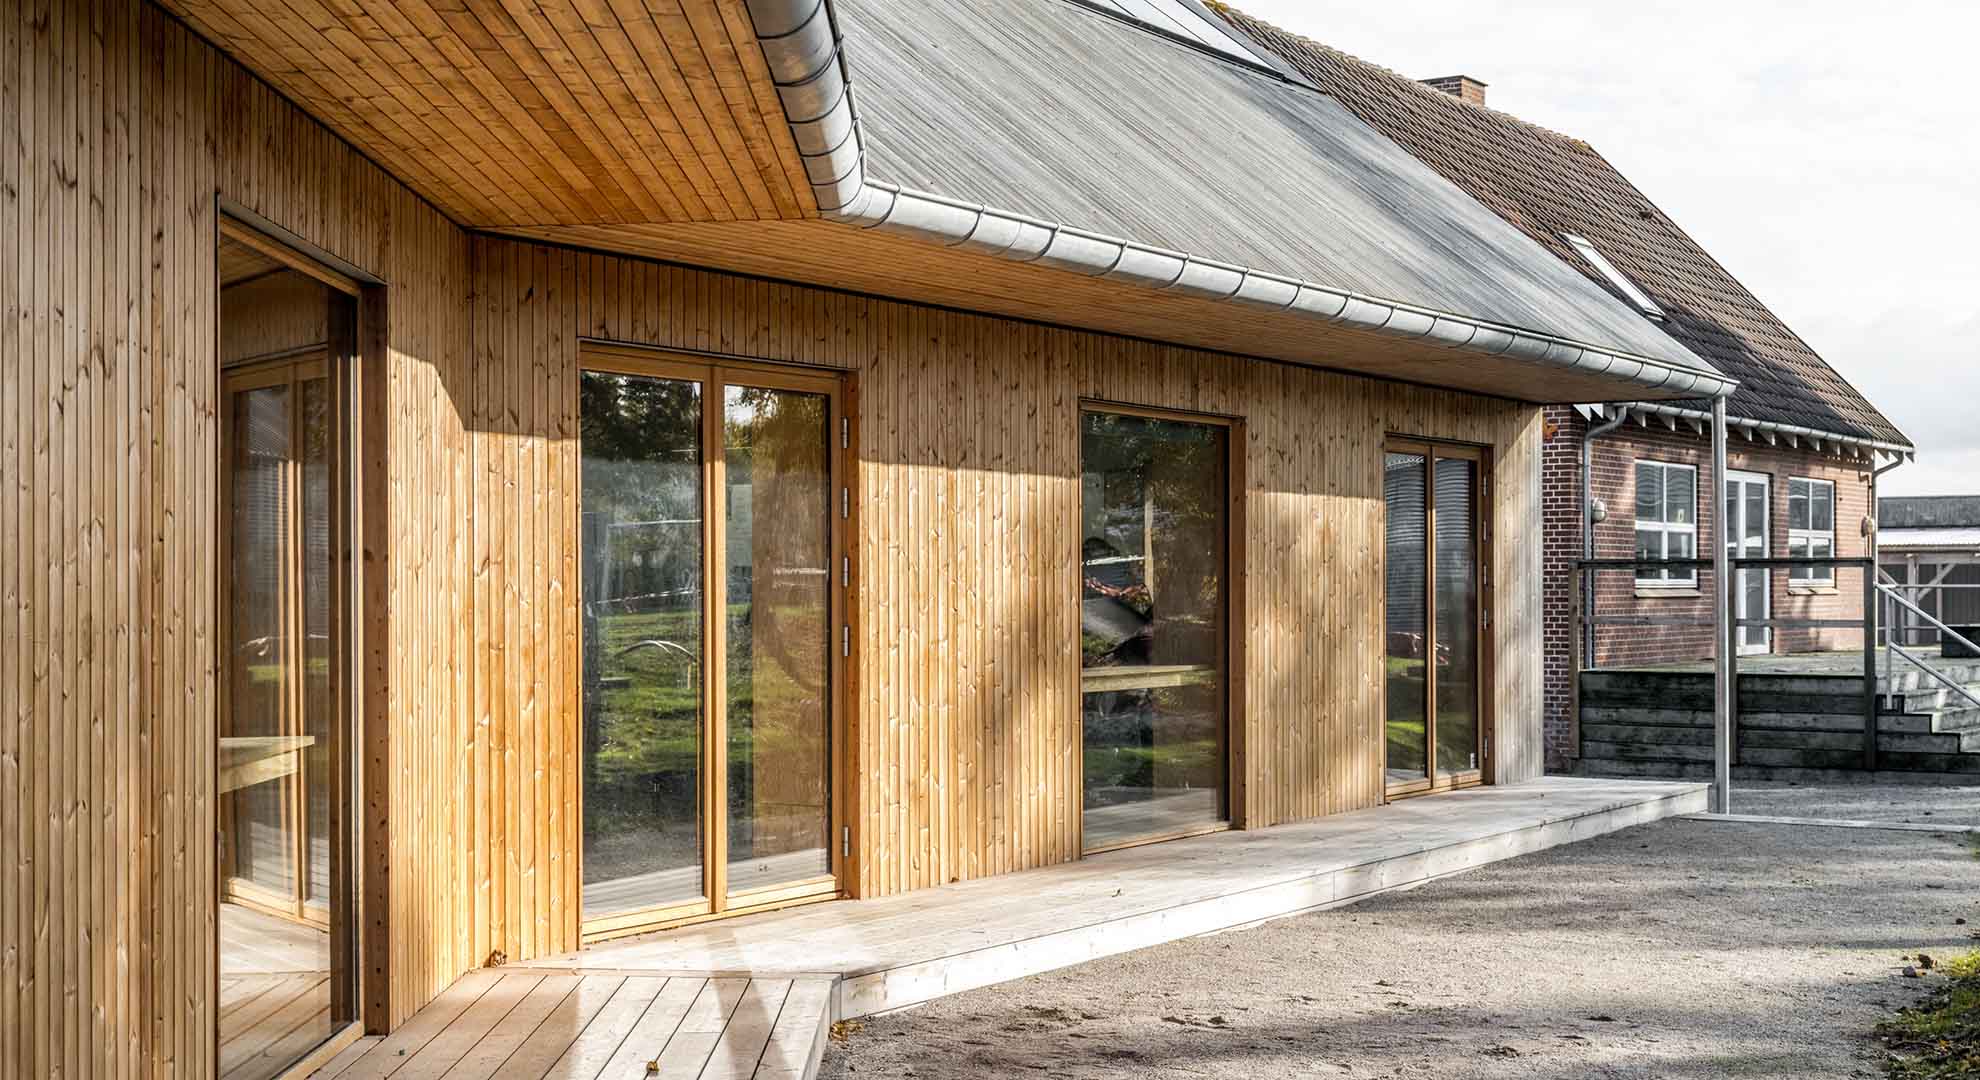 Materials such as wood and straw were used in an external structural wall in Denmark.